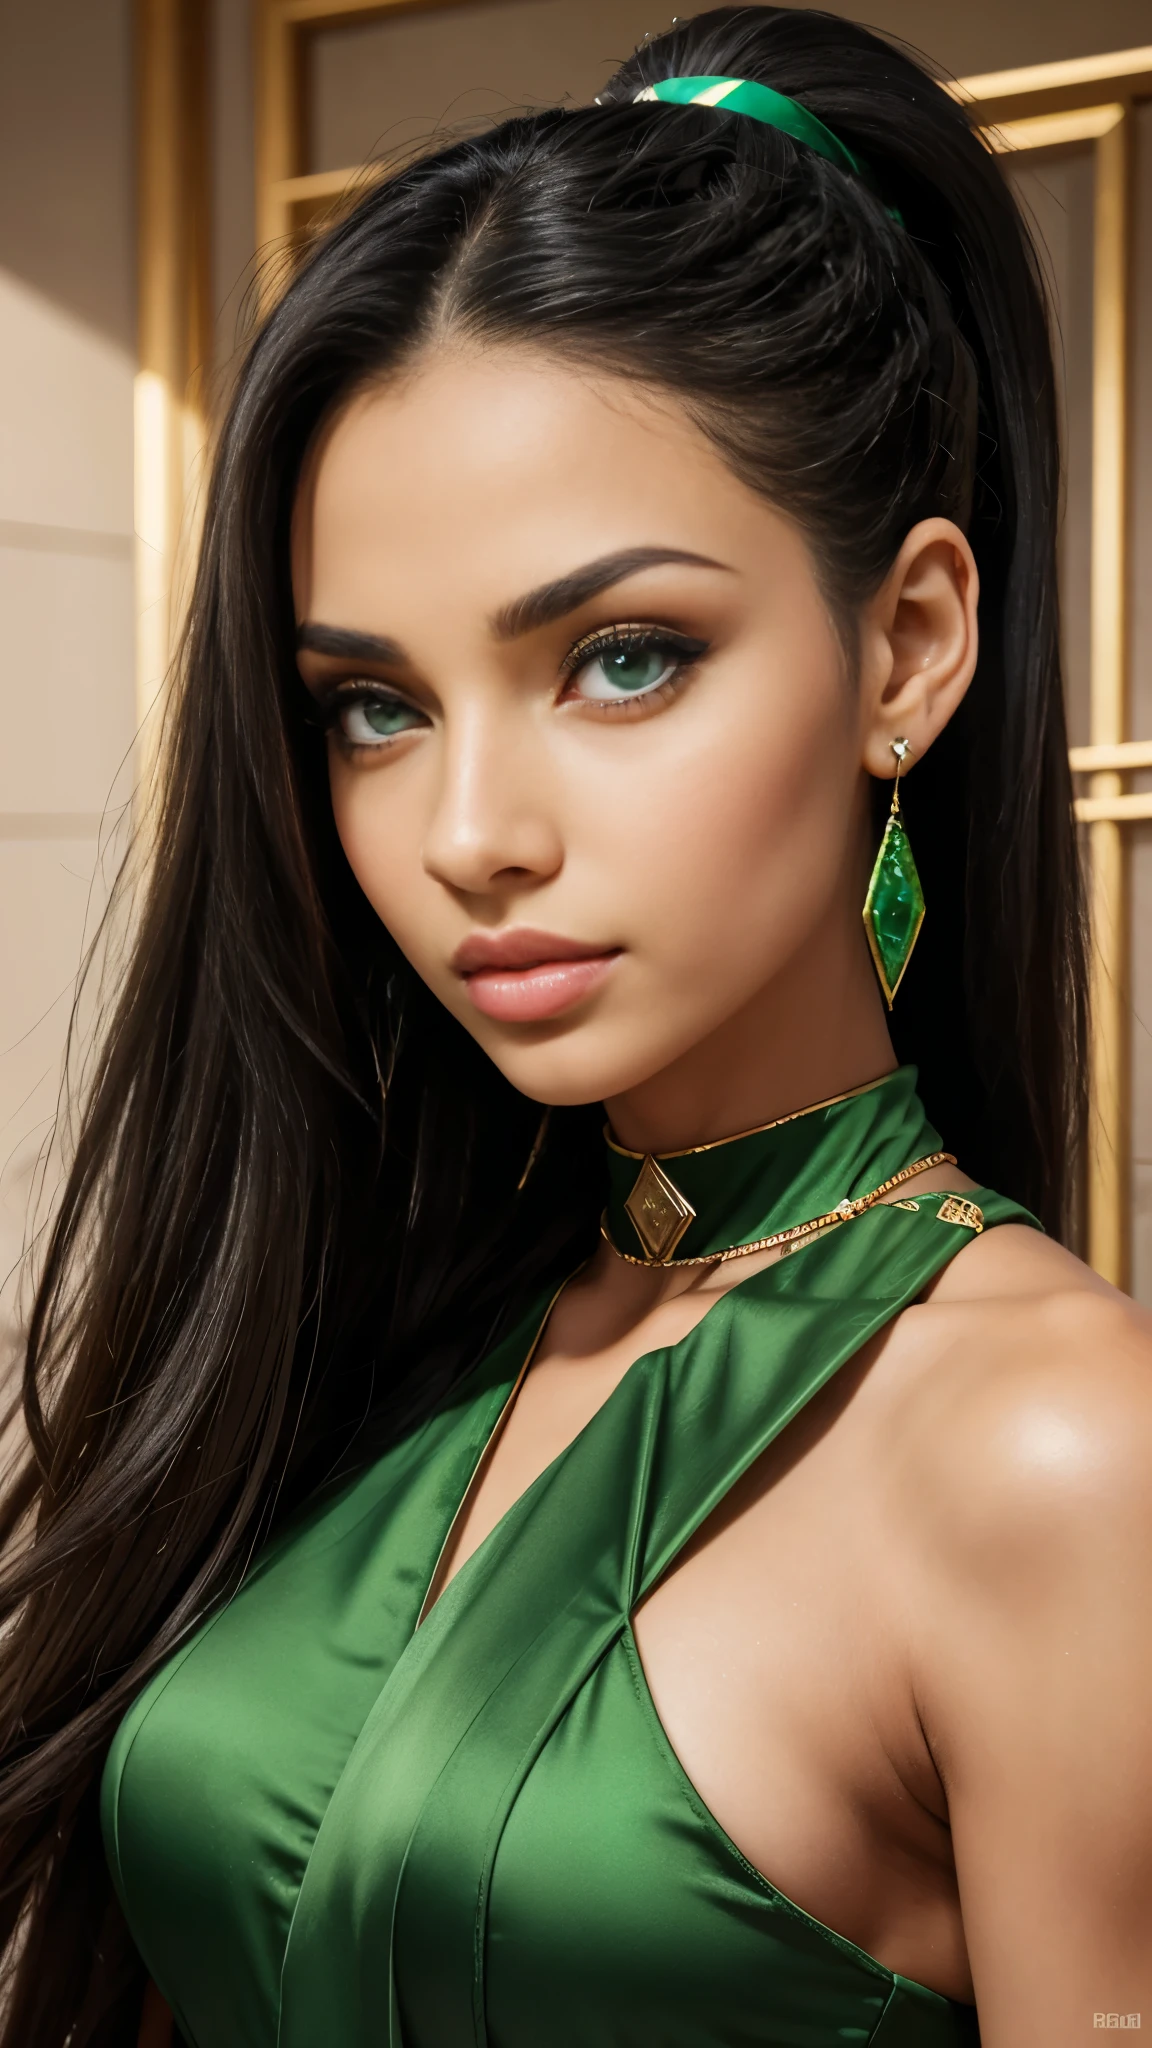 Diamond face shape, green eyes, eyes Egyptian, big lips, lips natural colored, beautiful, long hair, black hair, hair in a ponytail, green rhombus stone in the forehead, thin earrings 